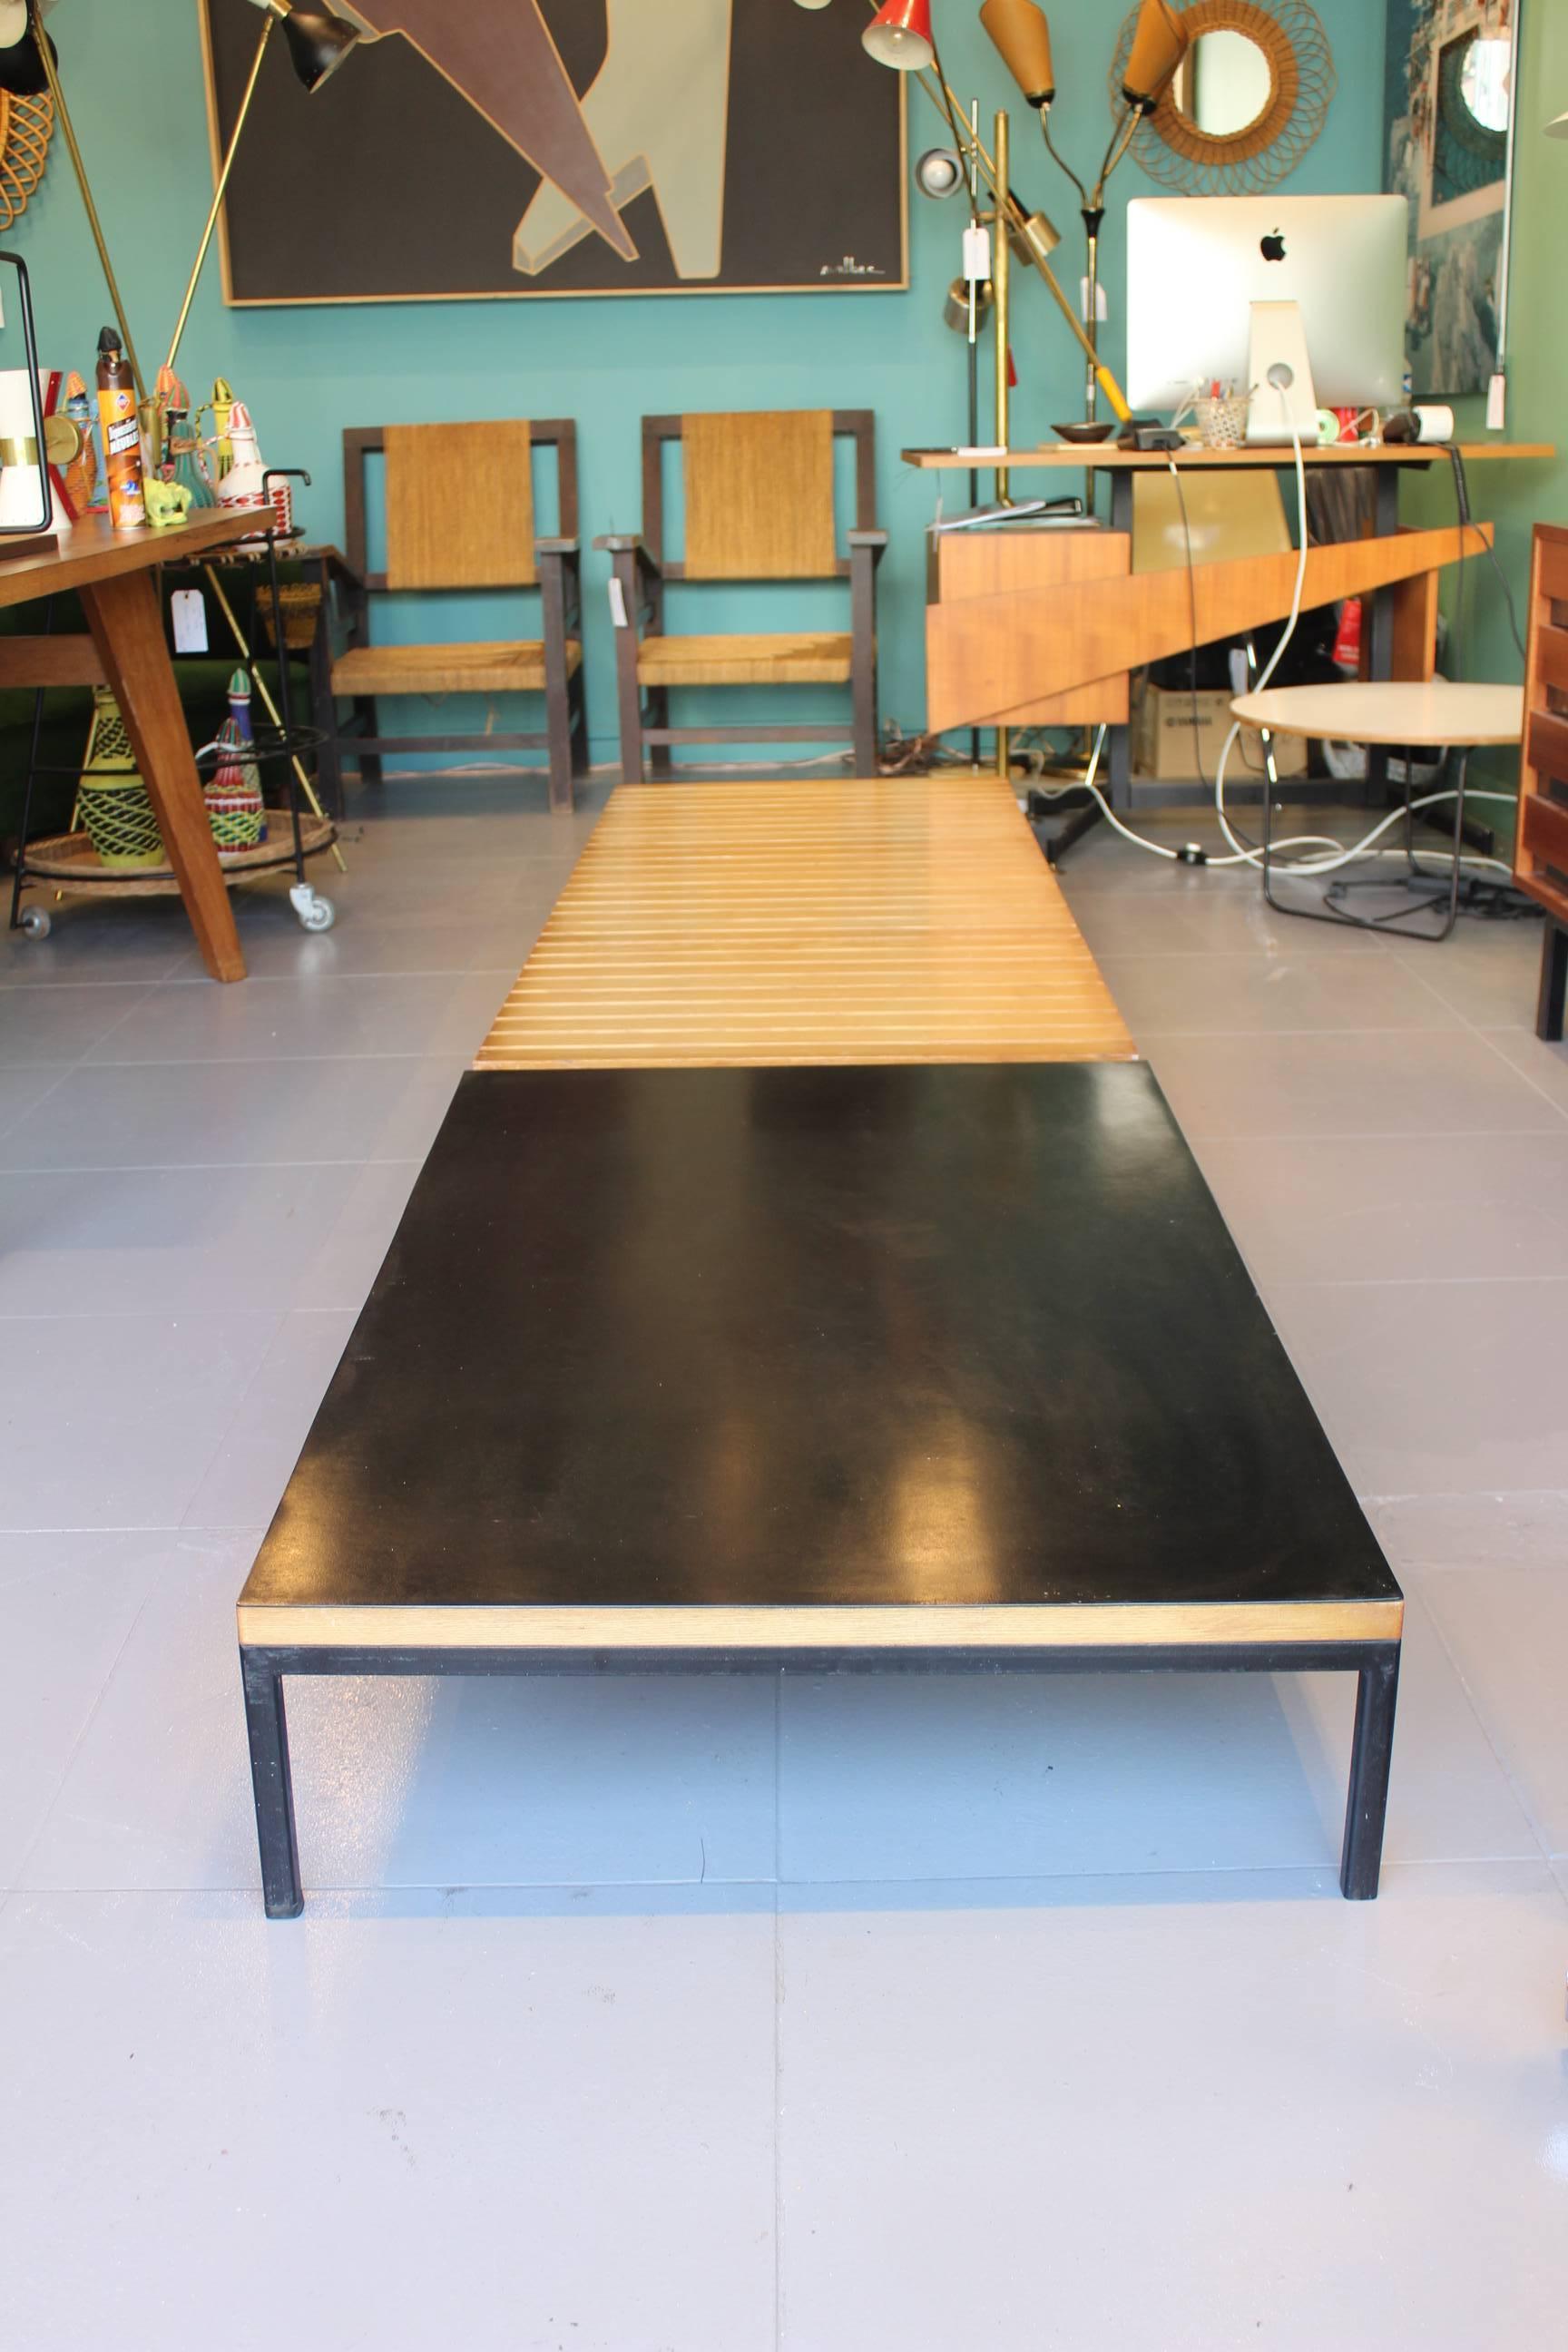 Claude Gaillard beautiful pair of low tables (one, table or bench), circa 1960, in excellent condition, the one with wooden bars can be used as bench.
Measures: 190 cm x 70 cm x H 23 cm
110 cm x 70 cm x H 23 cm (Black table).